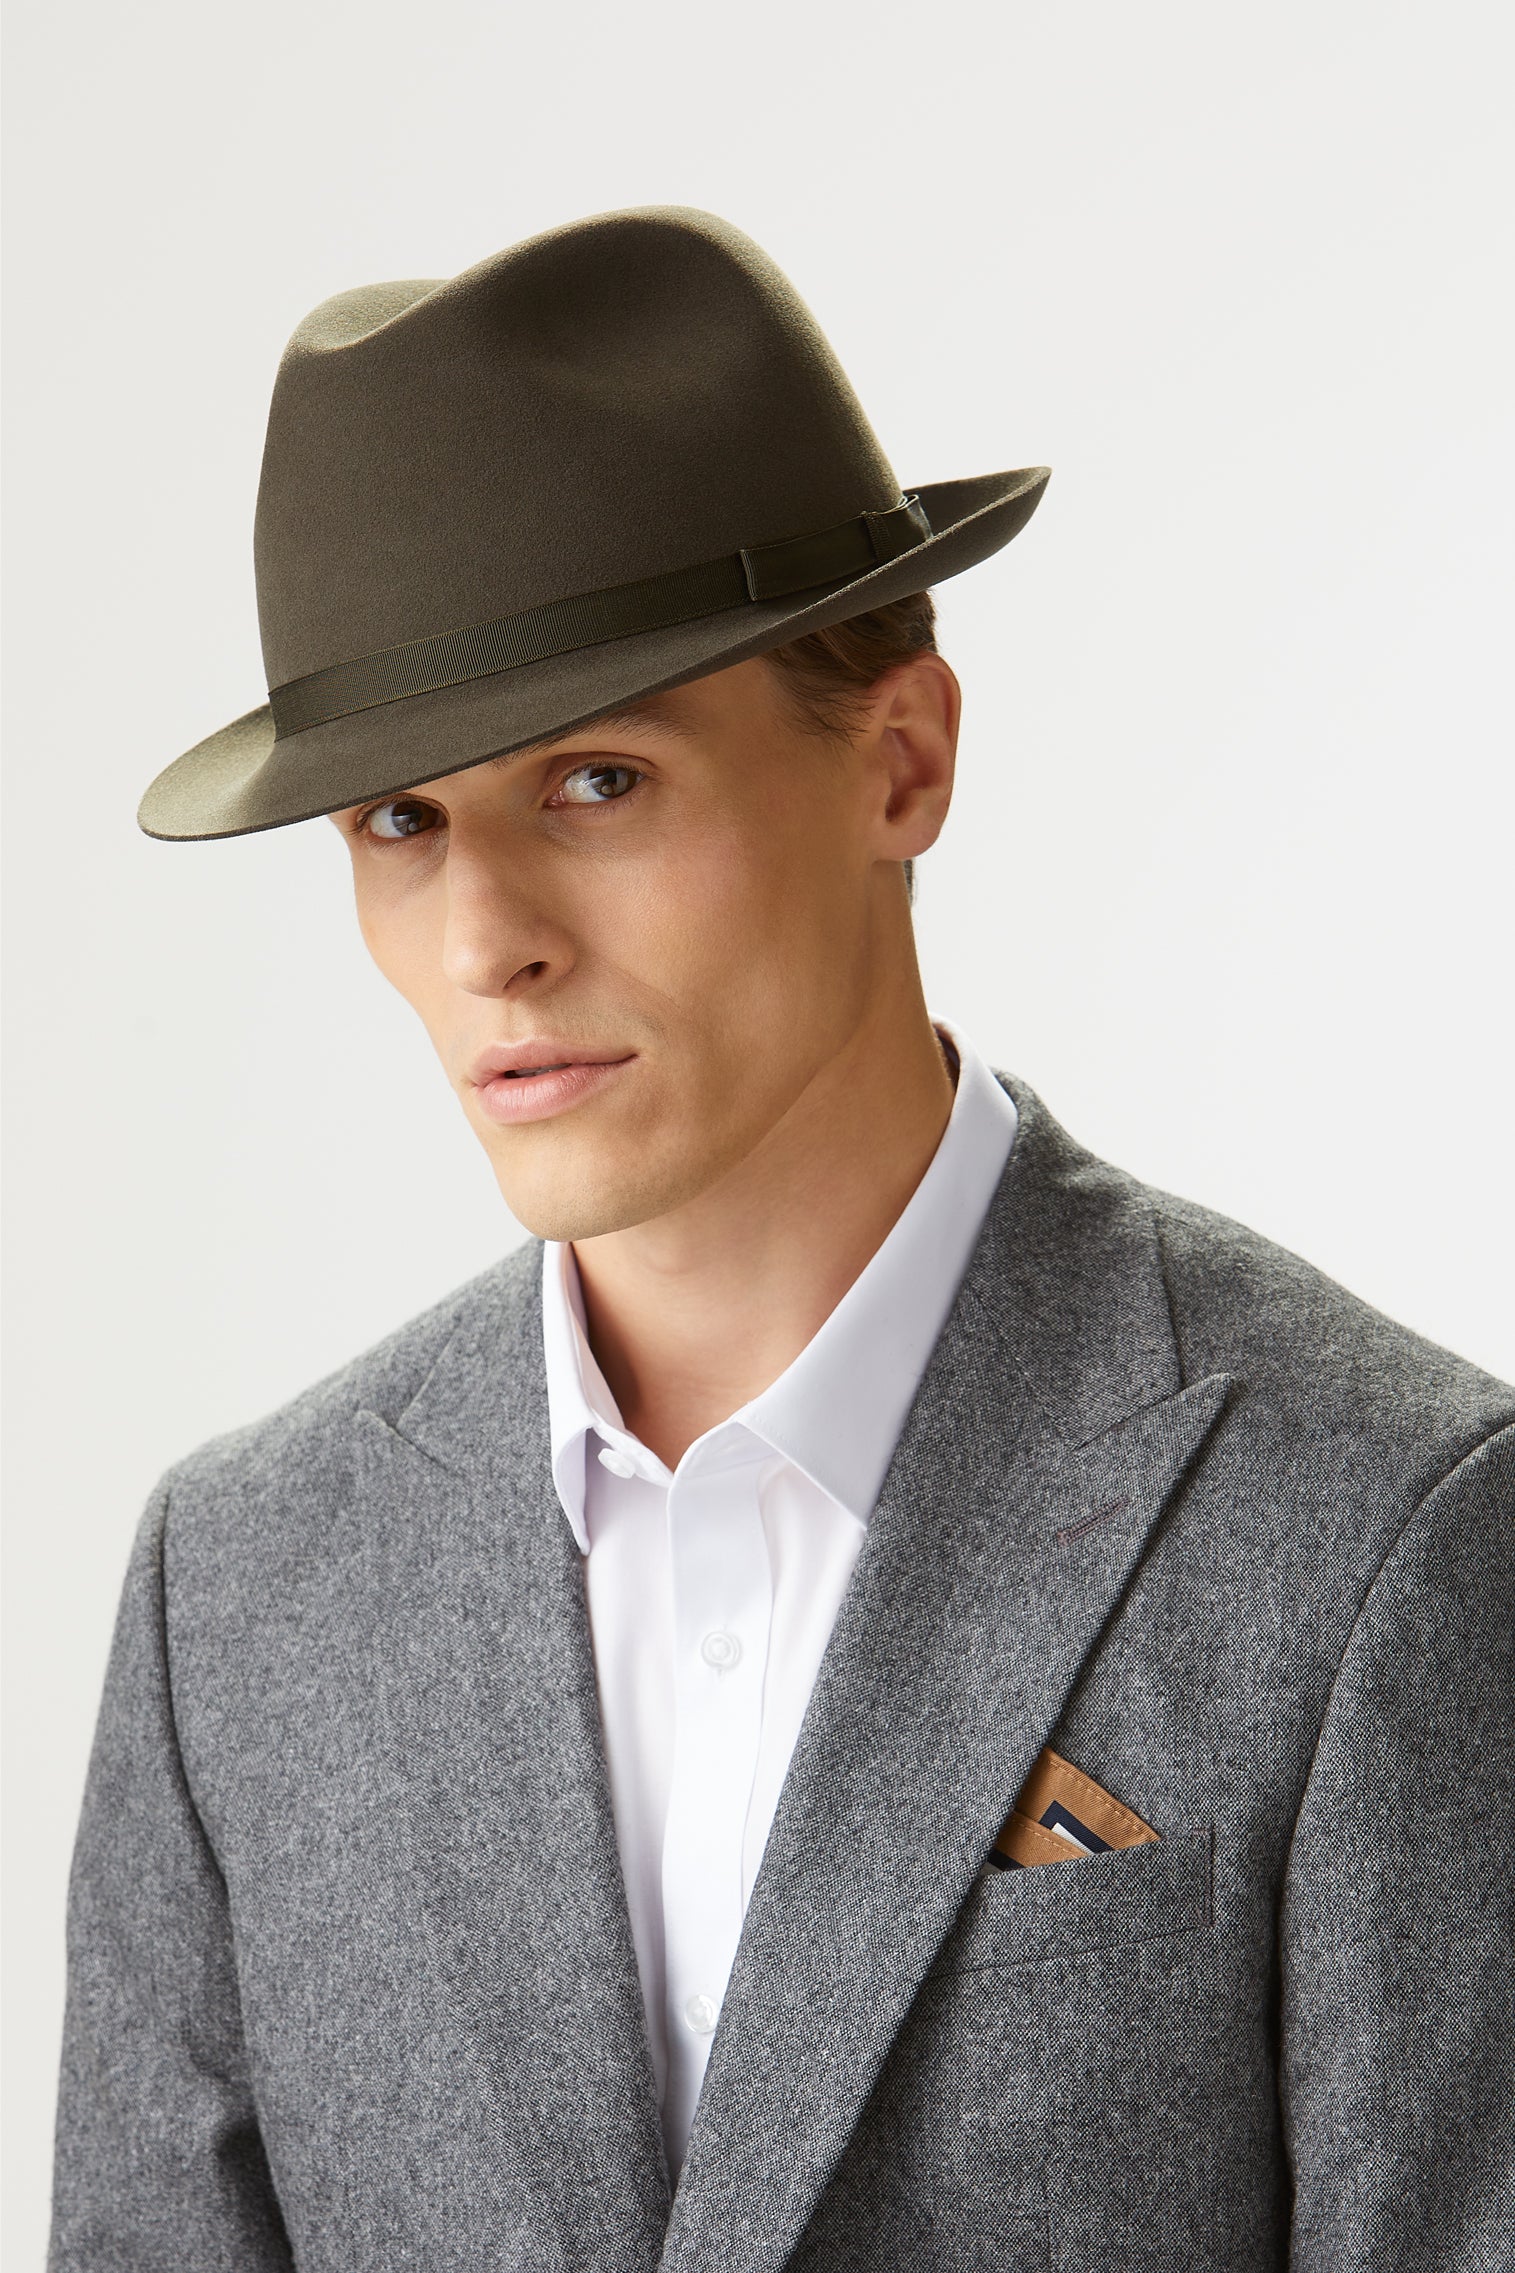 KHAKI GREEN ESCORIAL WOOL NARROW-BRIMMED TRILBY HAT FROM THE LOCK & CO. HATTERS X 007 BOND COLLECTION